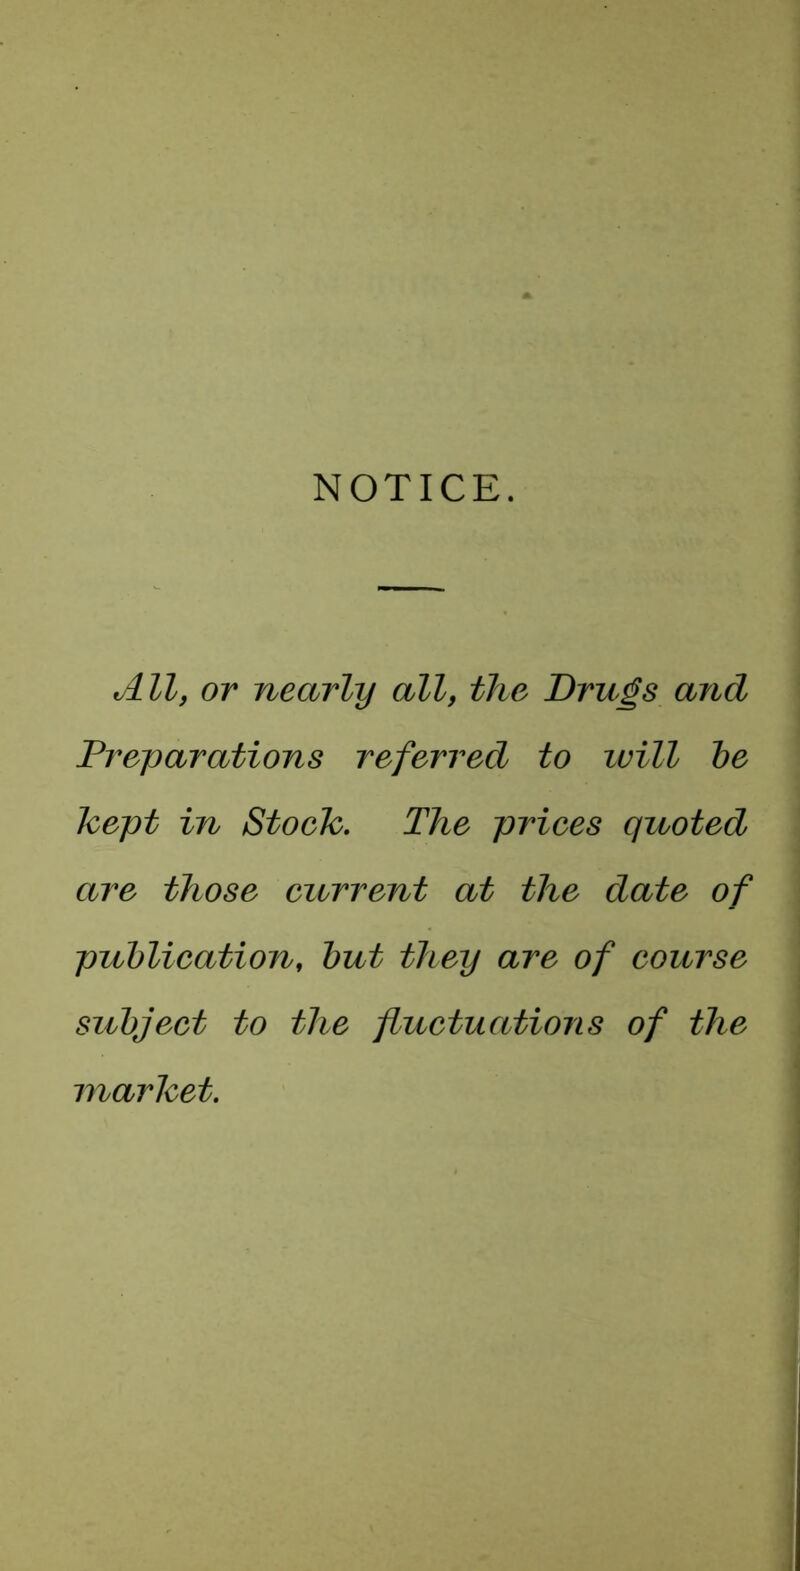 NOTICE. All, or nearly all, the Drugs and Preparations referred to ivill he Tcept in Stoeh, The priees quoted are those current at the date of pziblieation, hut they are of course subject to the fluctuations of the marhet.